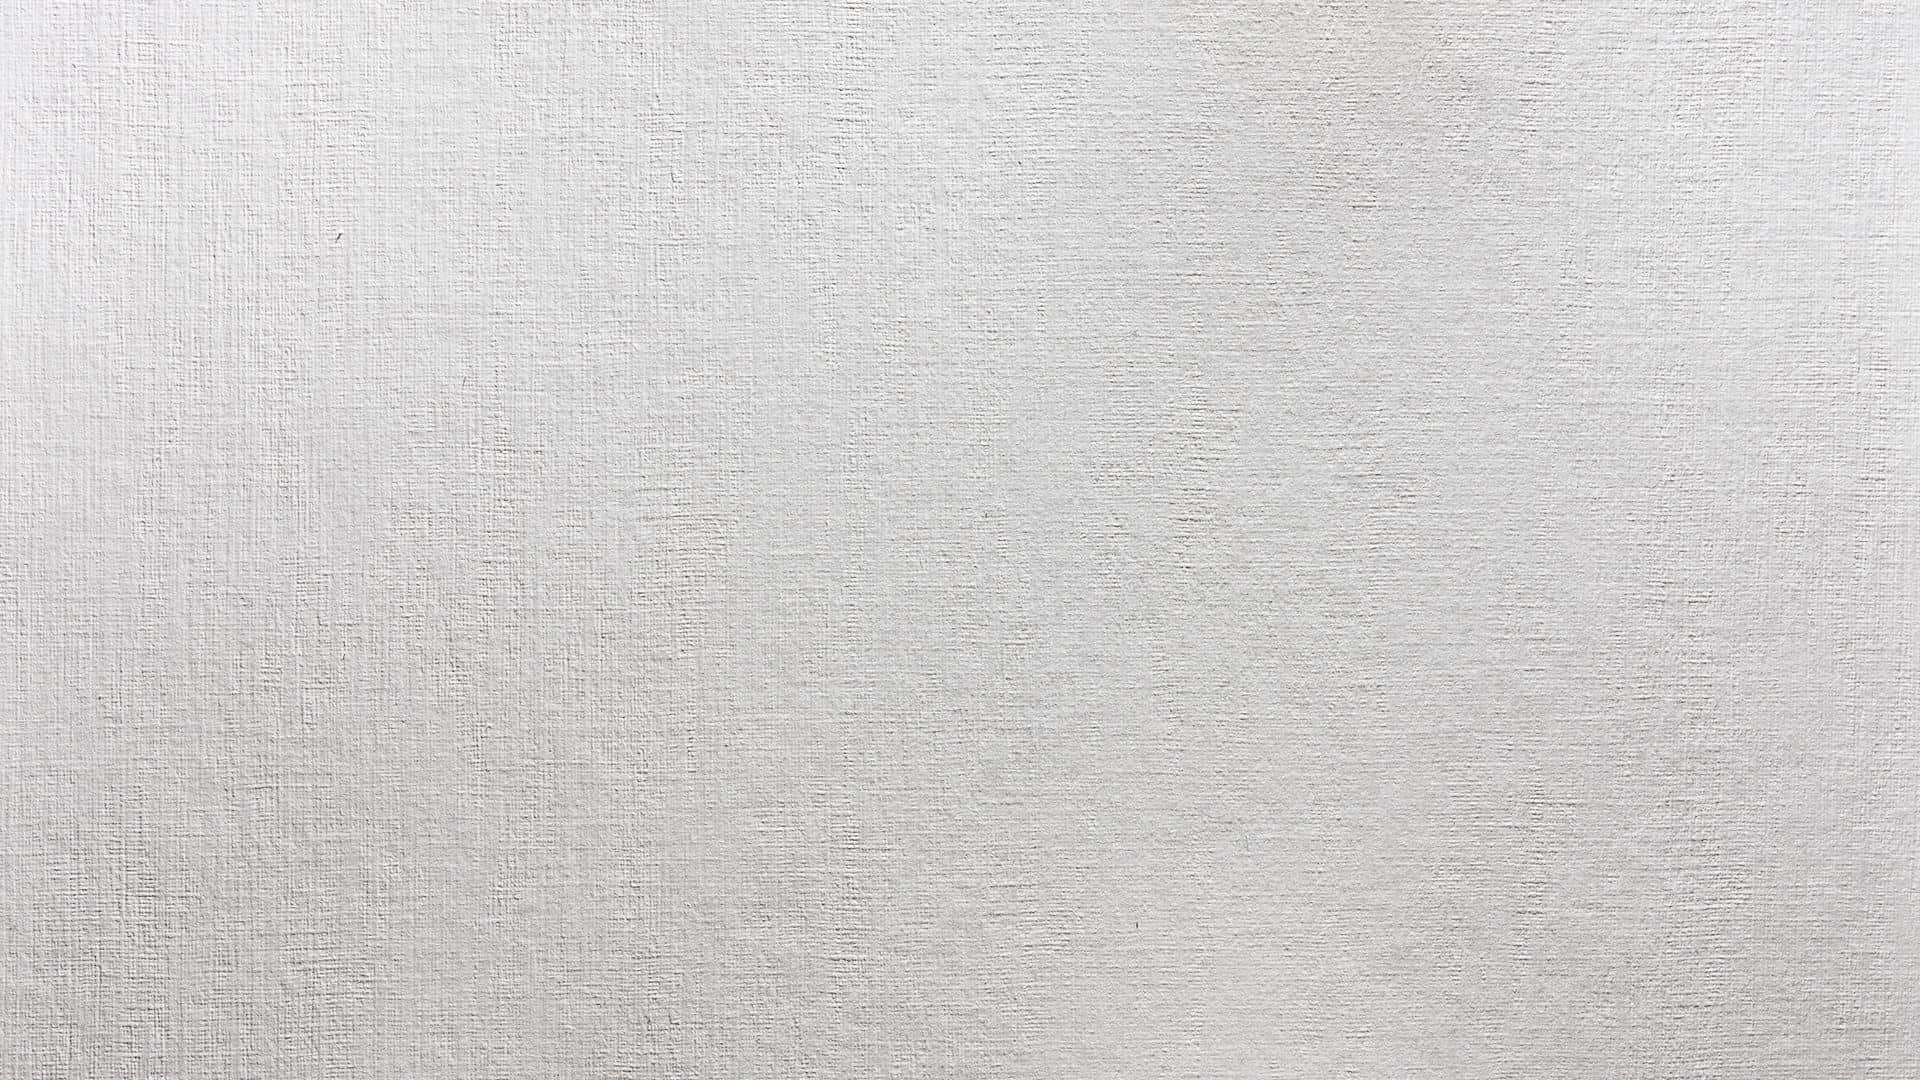 Granular White Texture Paper Pictures